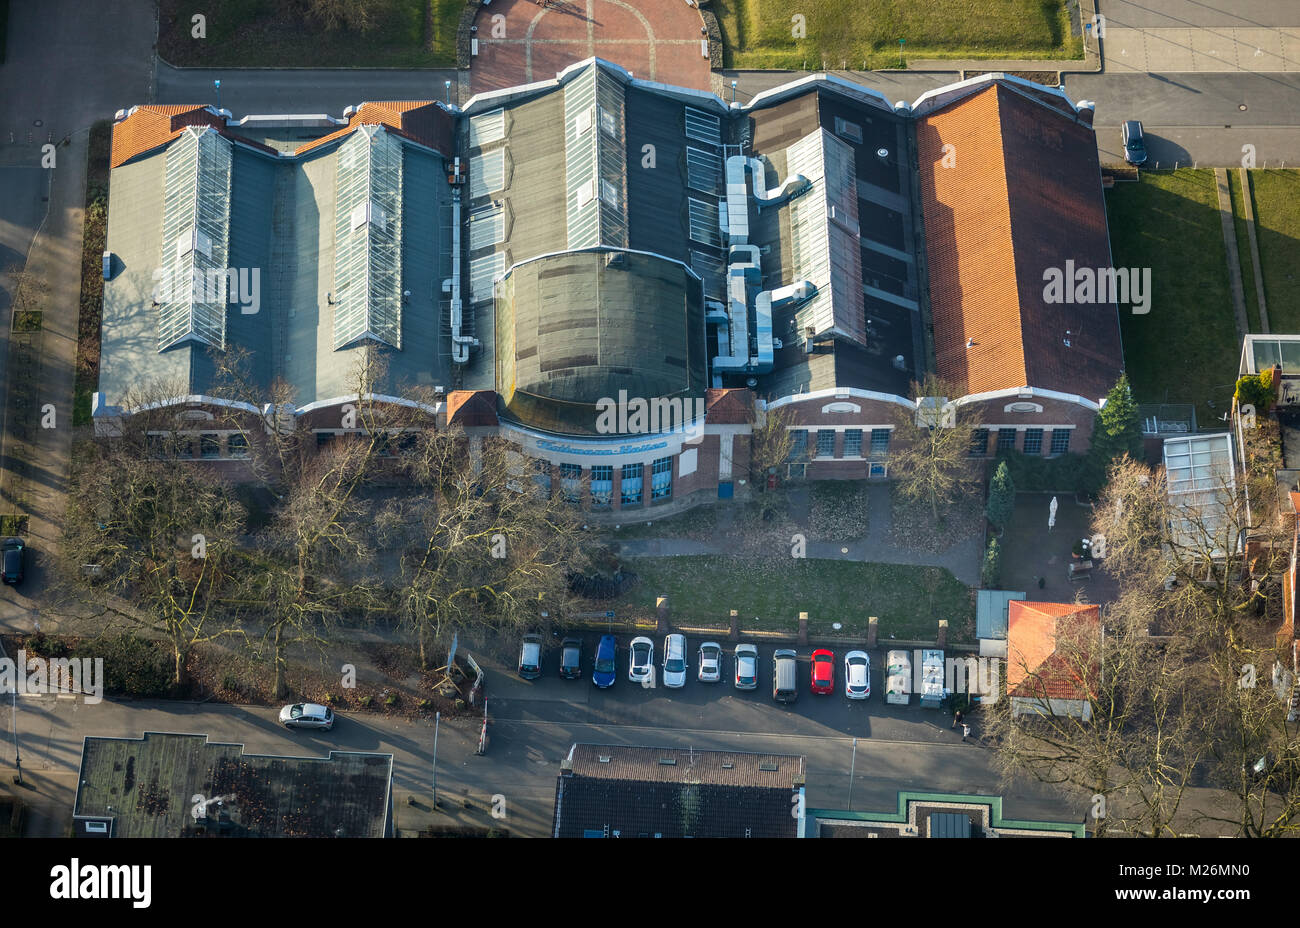 Flottmann halls, Center for Art and Culture, street of the hammer drill, Herne, Ruhr area, North Rhine-Westphalia, Germany, UK, Europe, aerial view, b Stock Photo